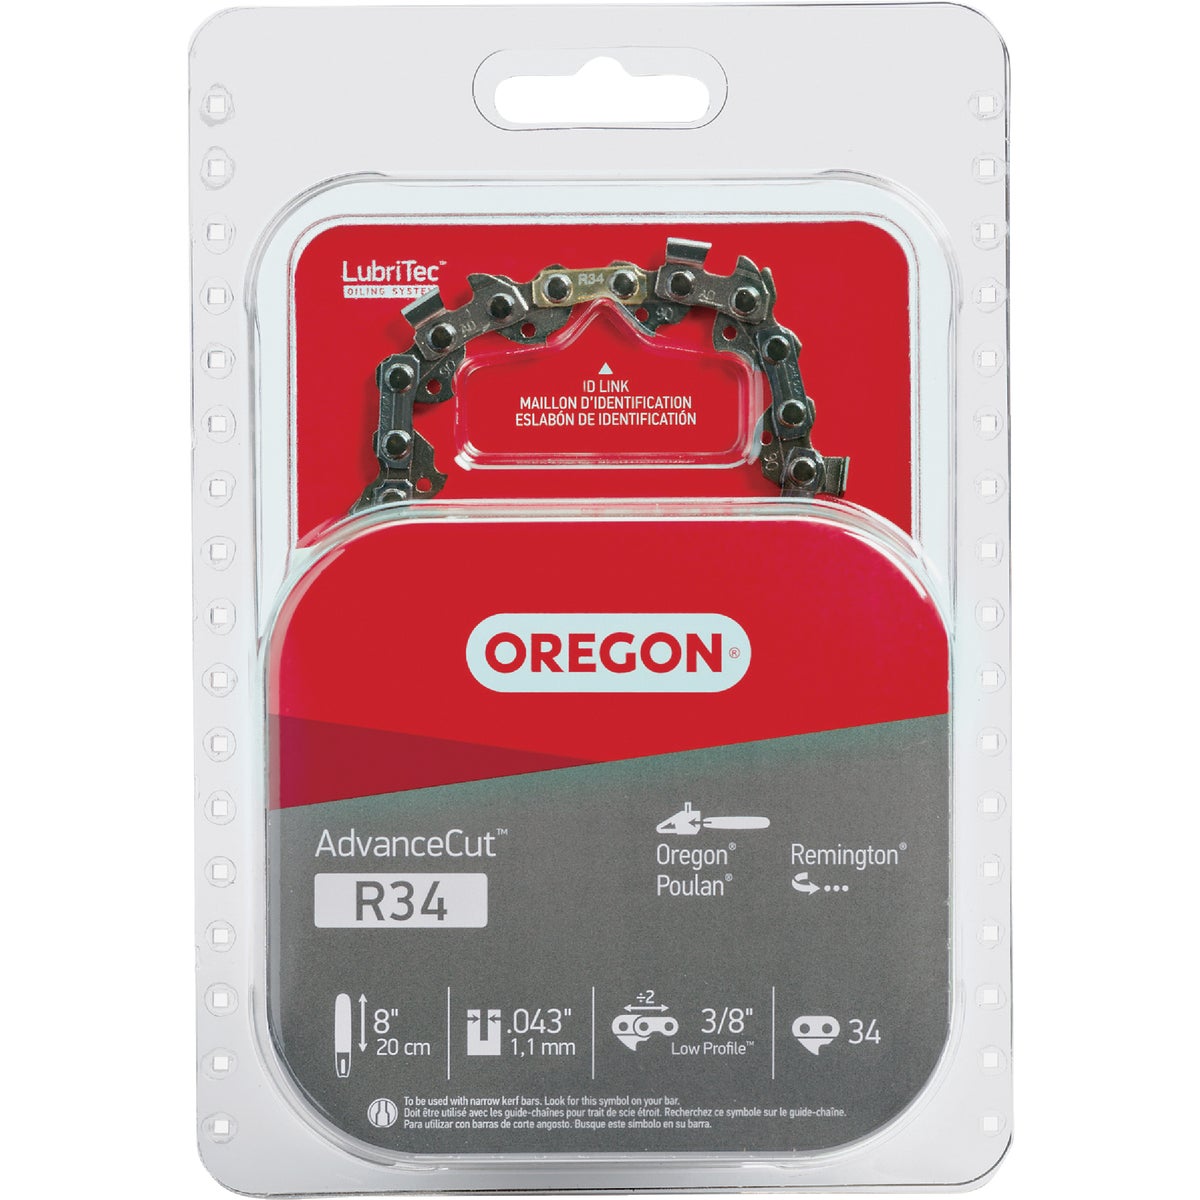 Item 722285, The Oregon AdvanceCut Saw Chain is ideal for landscapers and homeowners 